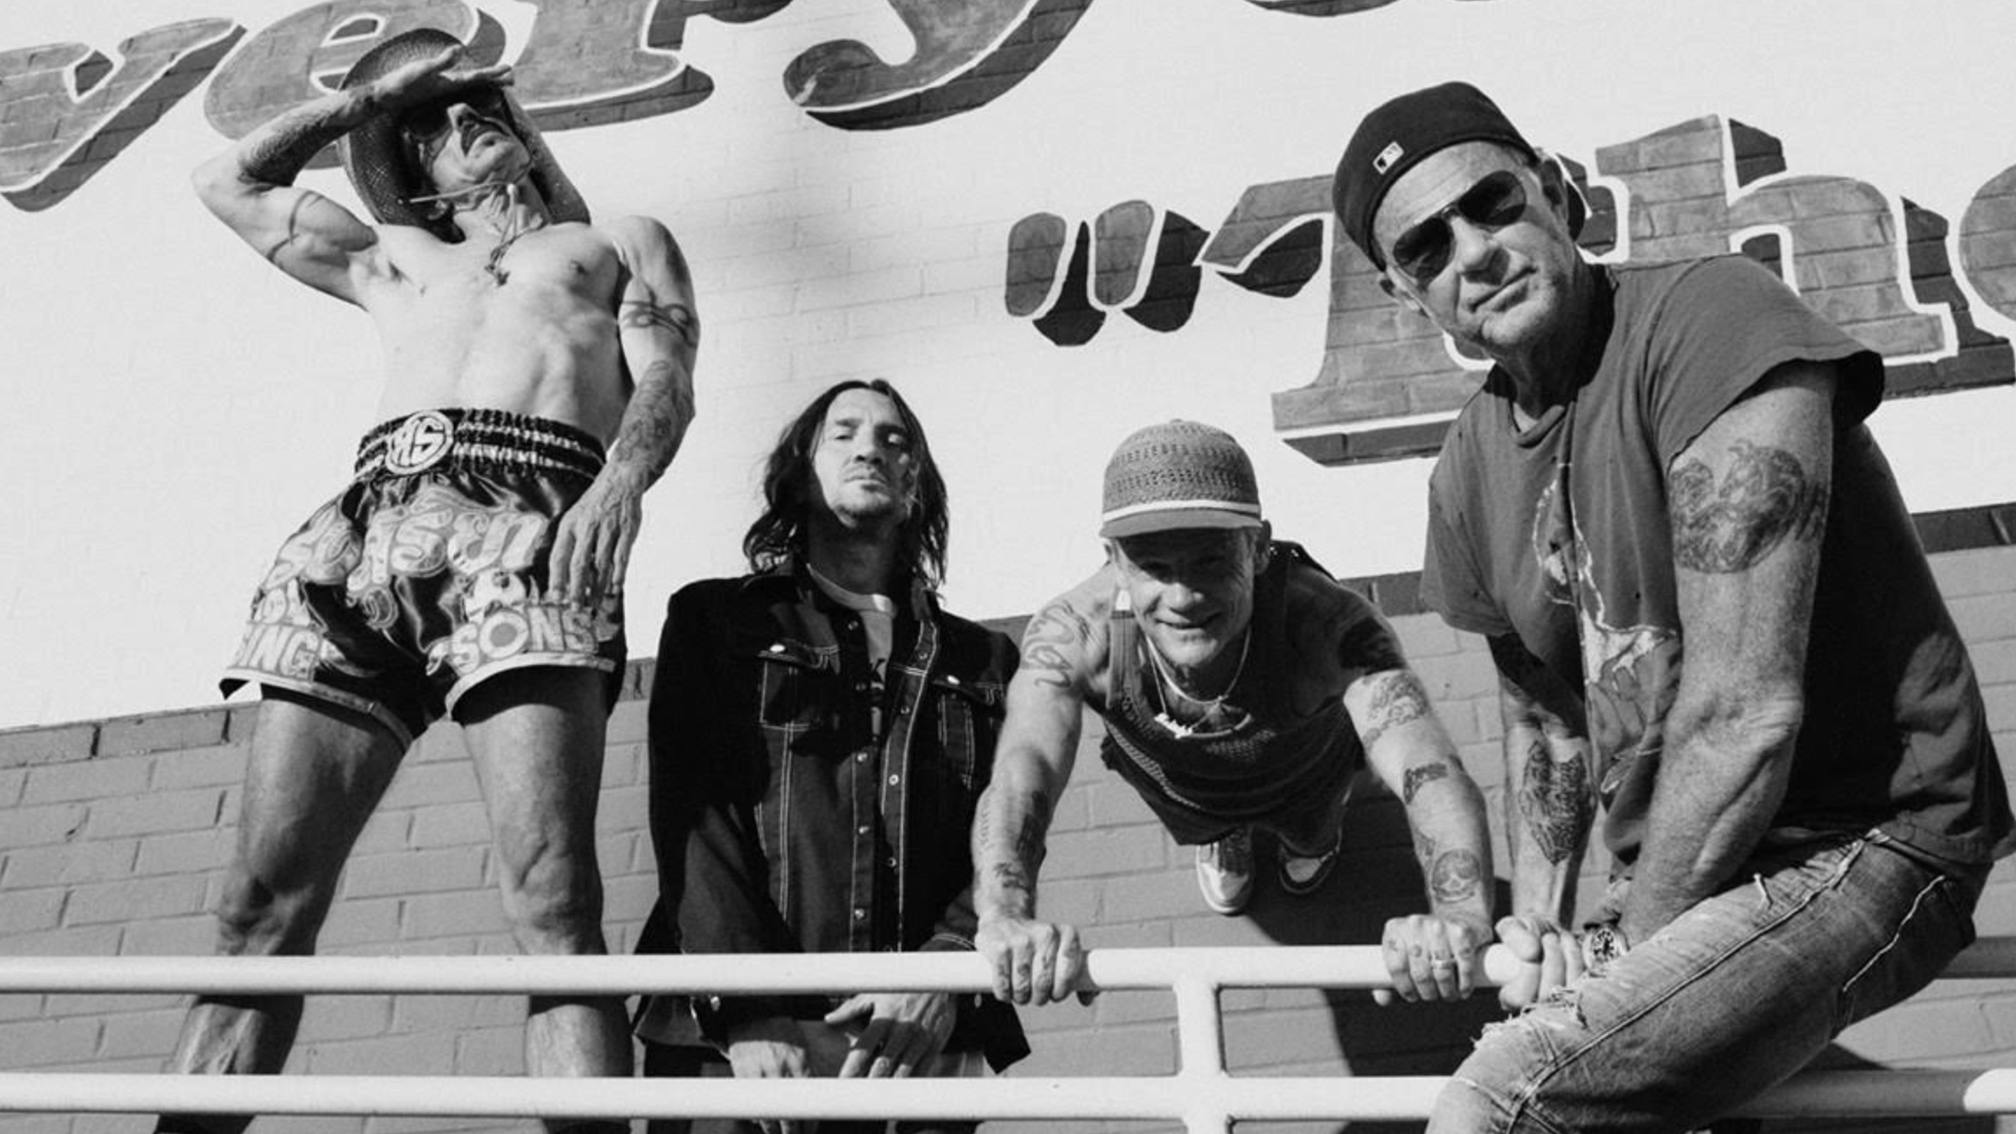 Red Hot Chili Peppers on reuniting with John Frusciante: “That was the most monumental change in our lives”